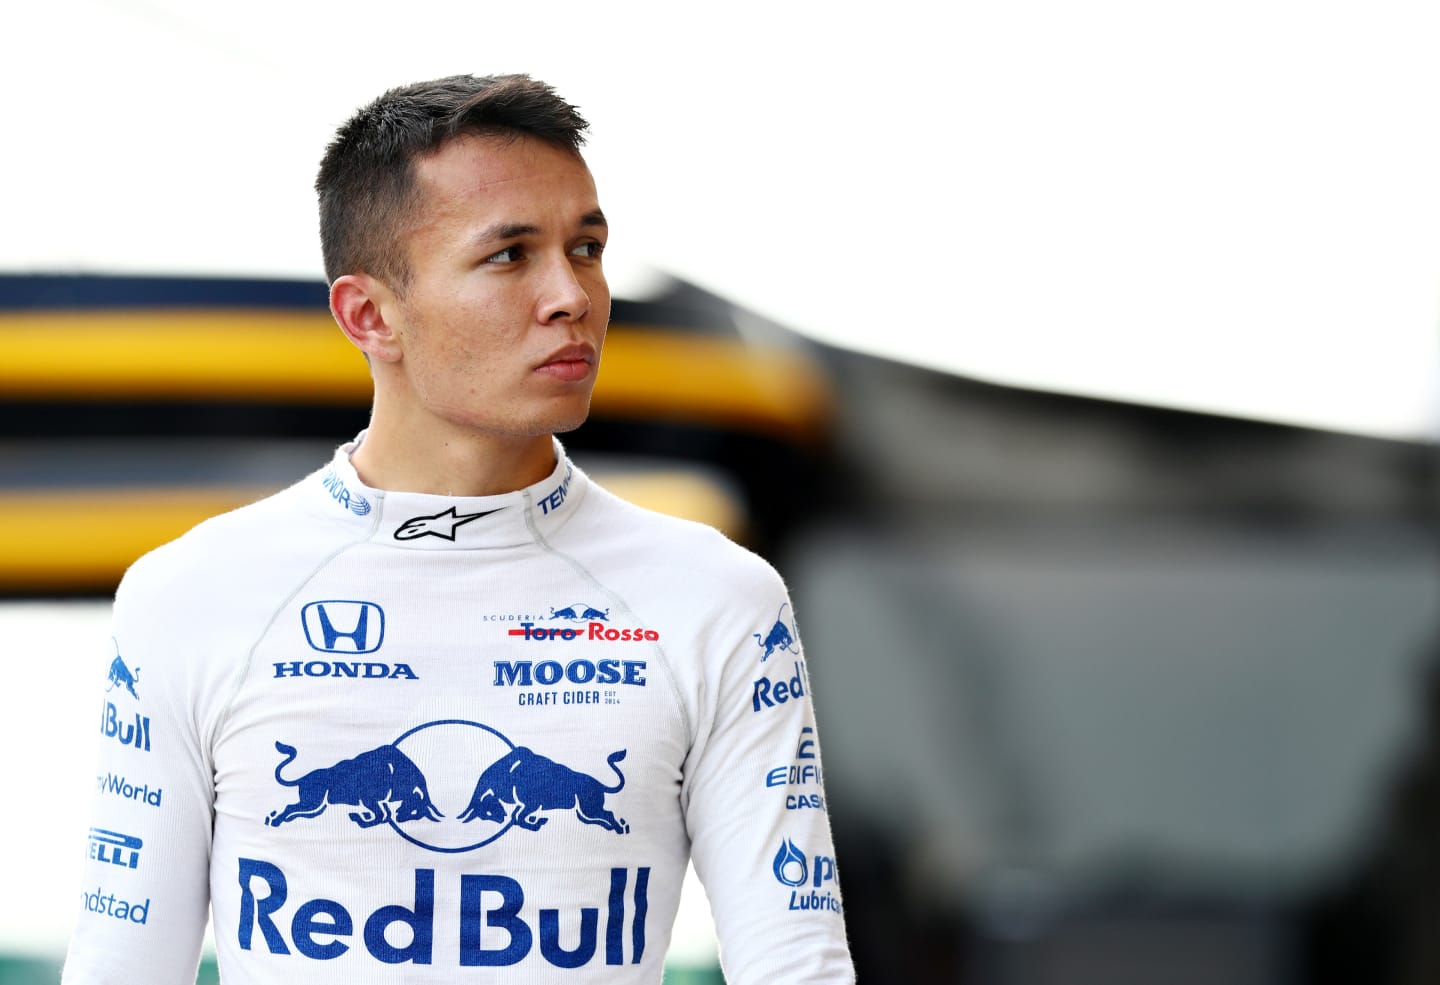 BUDAPEST, HUNGARY - AUGUST 03: Alexander Albon of Thailand and Scuderia Toro Rosso walks in the